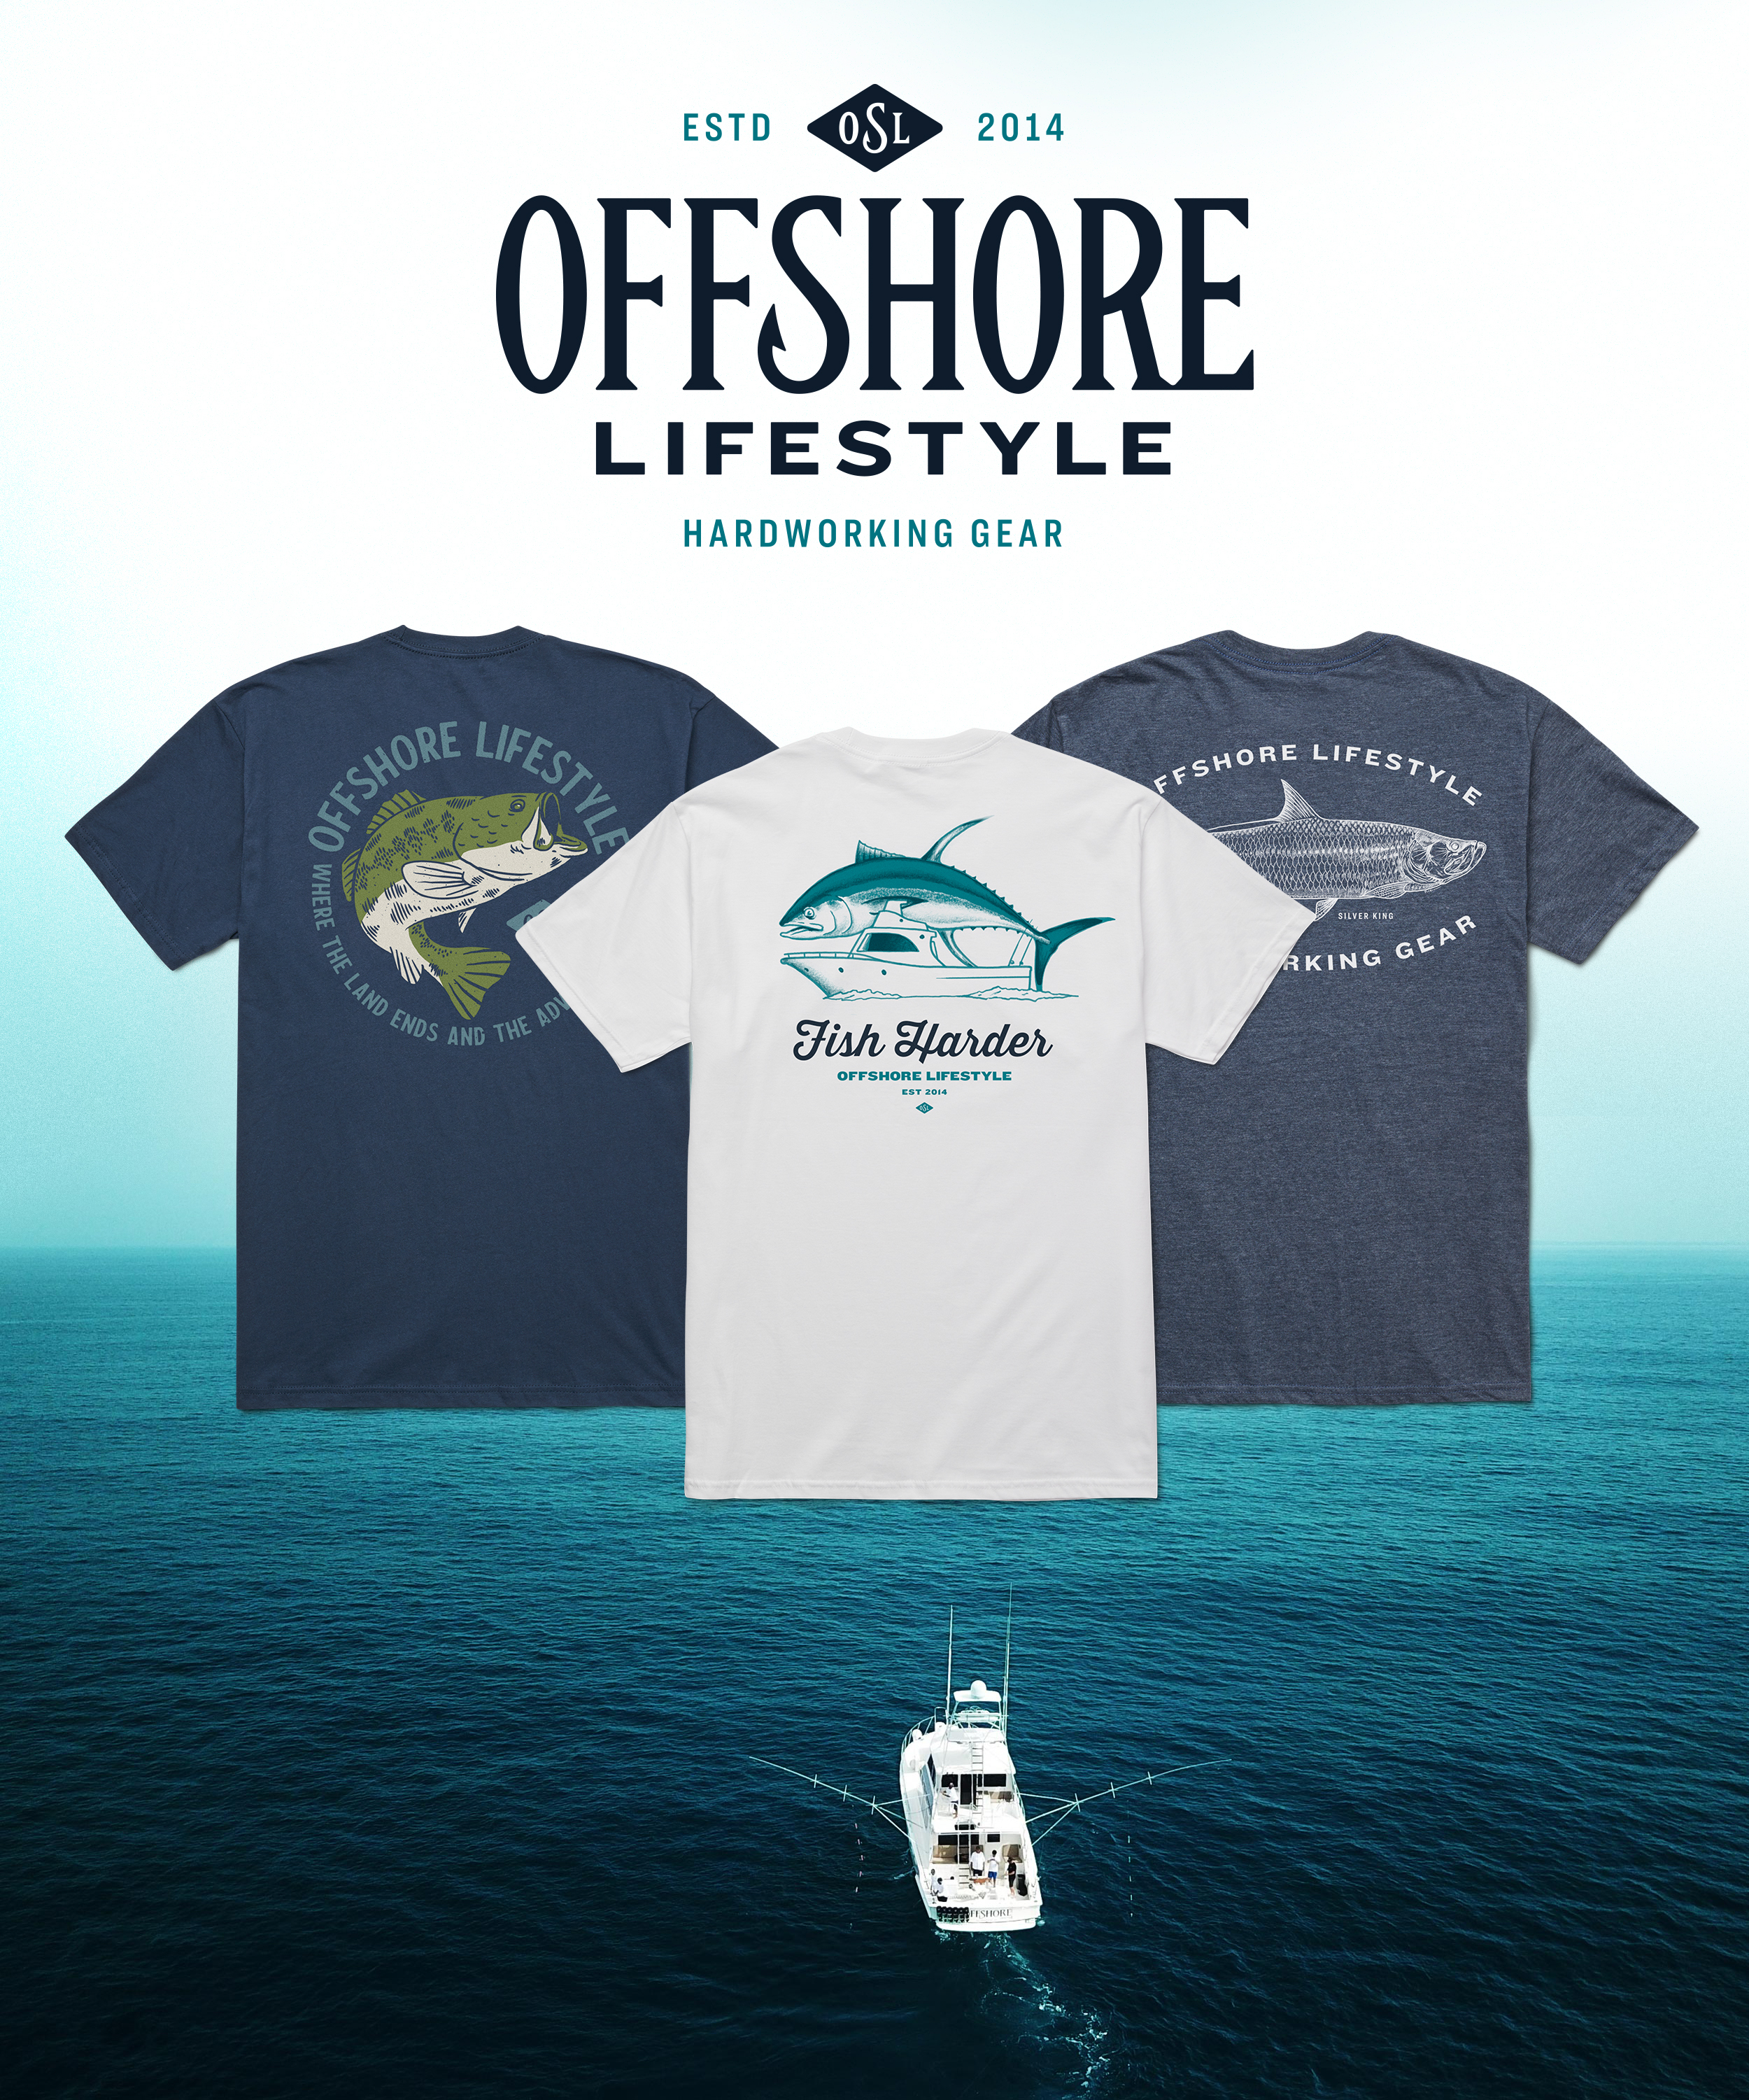 Offshore Lifestyle Releases New Hardworking Fishing Gear